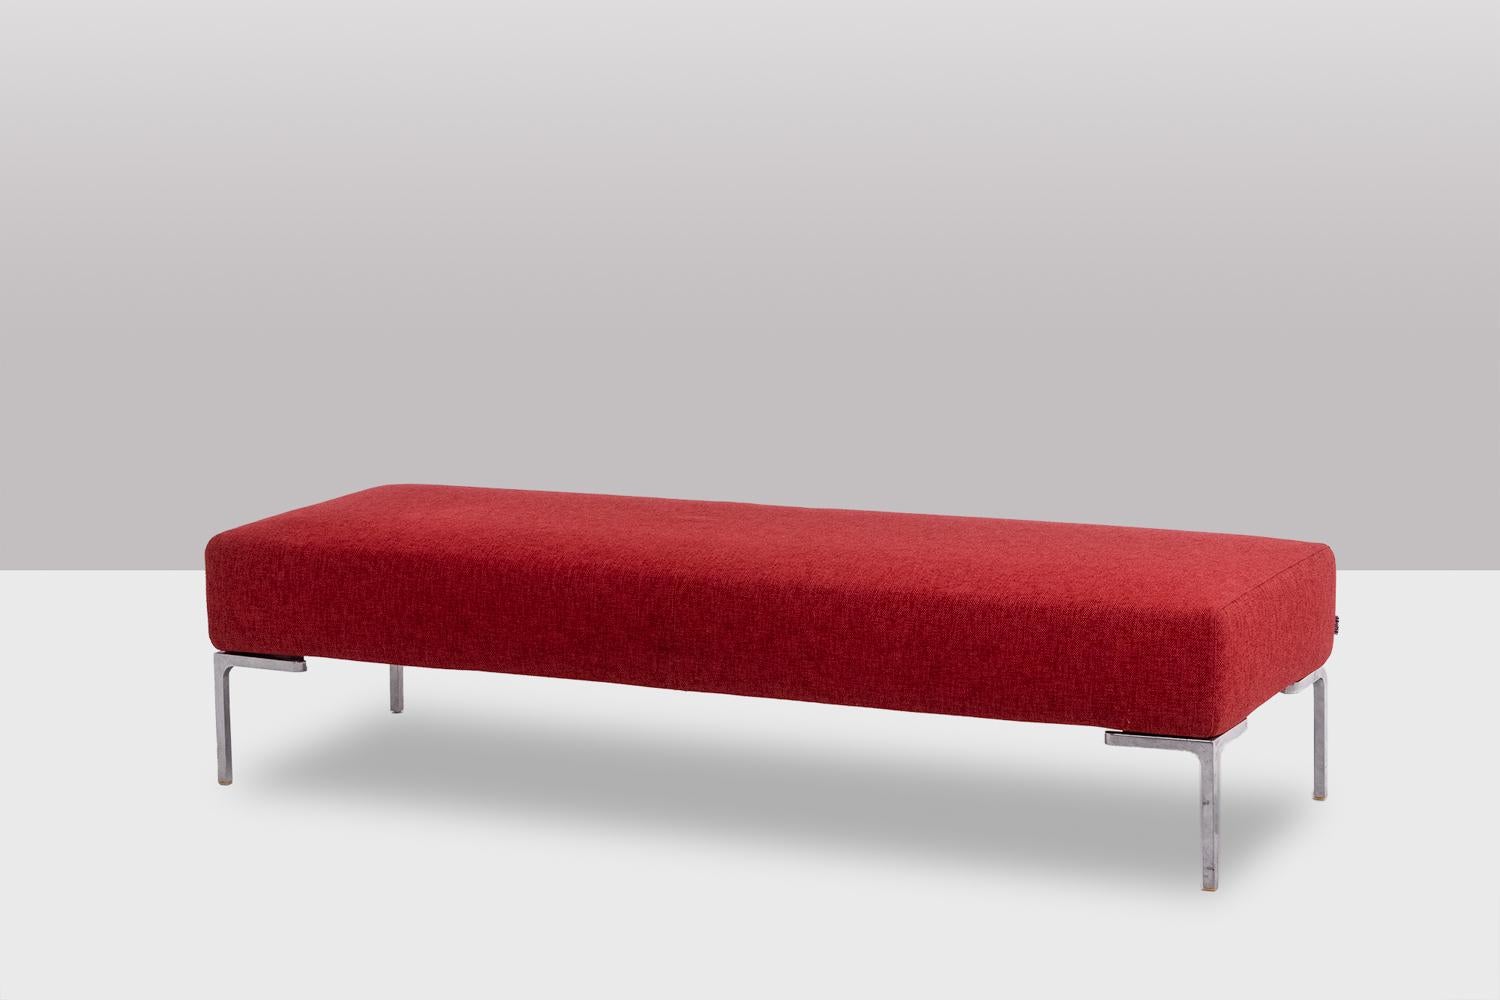 Antonio Citterio for B&B, by.

Rectangular bench covered in red fabric, resting on a chrome metal base.

Italian work realized in the 1990s.

Dimensions: H 36 x W 152 x D 52 cm

Reference: LS5927756U